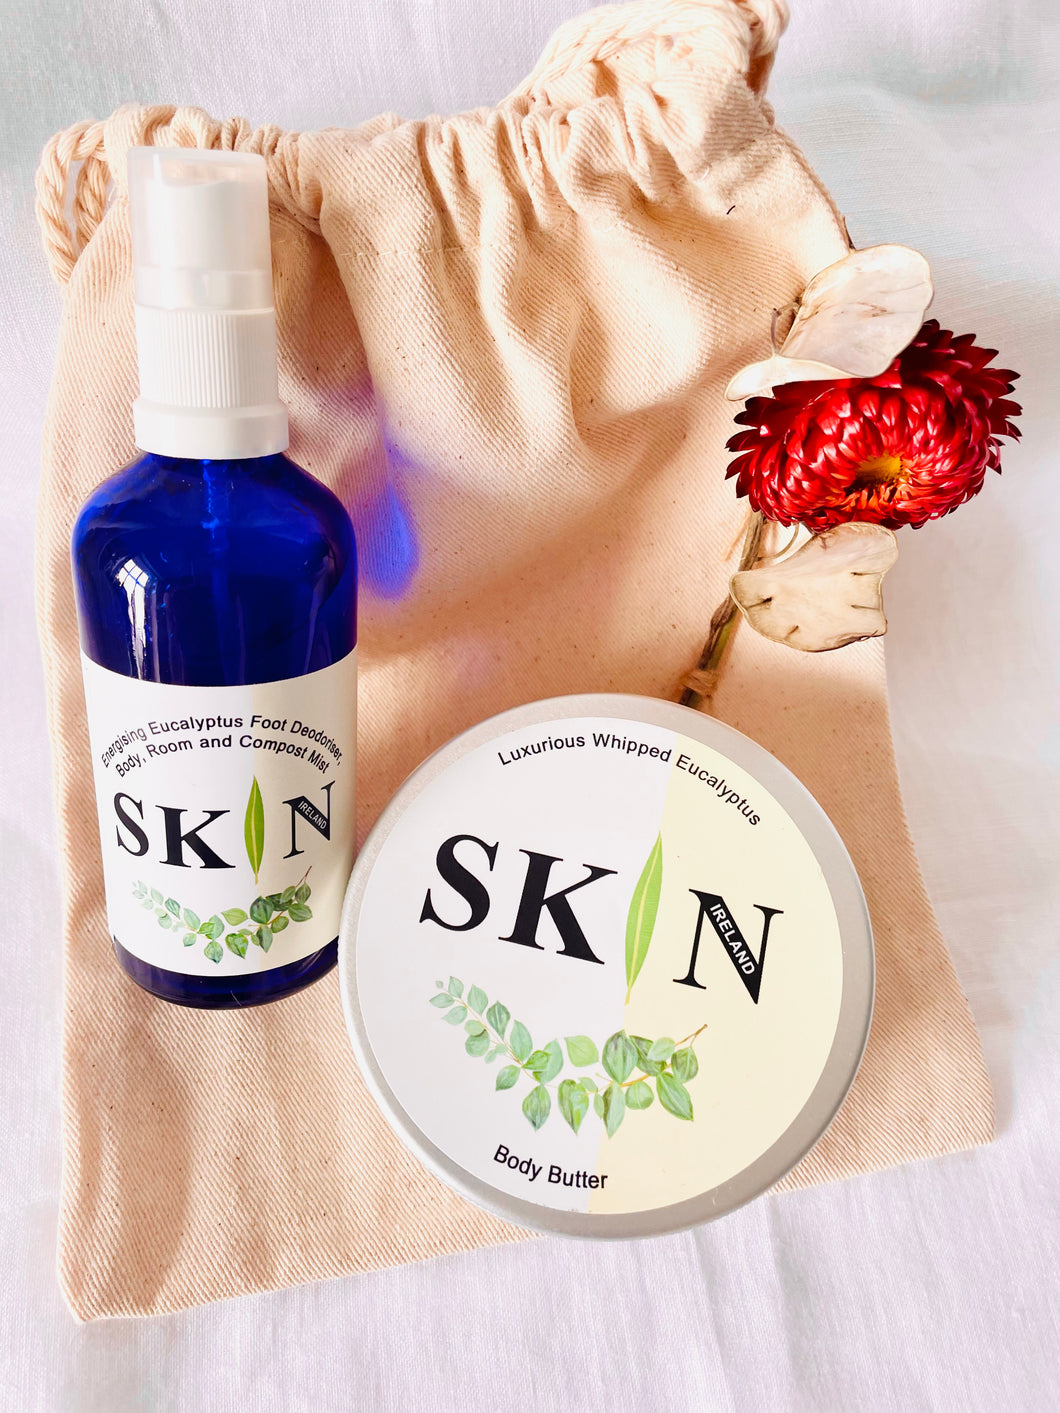 Gift Bag of Large (200ml) Luxurious Eucalyptus Body Butter and Energising Eucalyptus Body and Room Mist. Gift bag features Irish grown and naturally dried flower, hand-sewn onto linen bag. Ready to gift - no wrapping necessary!